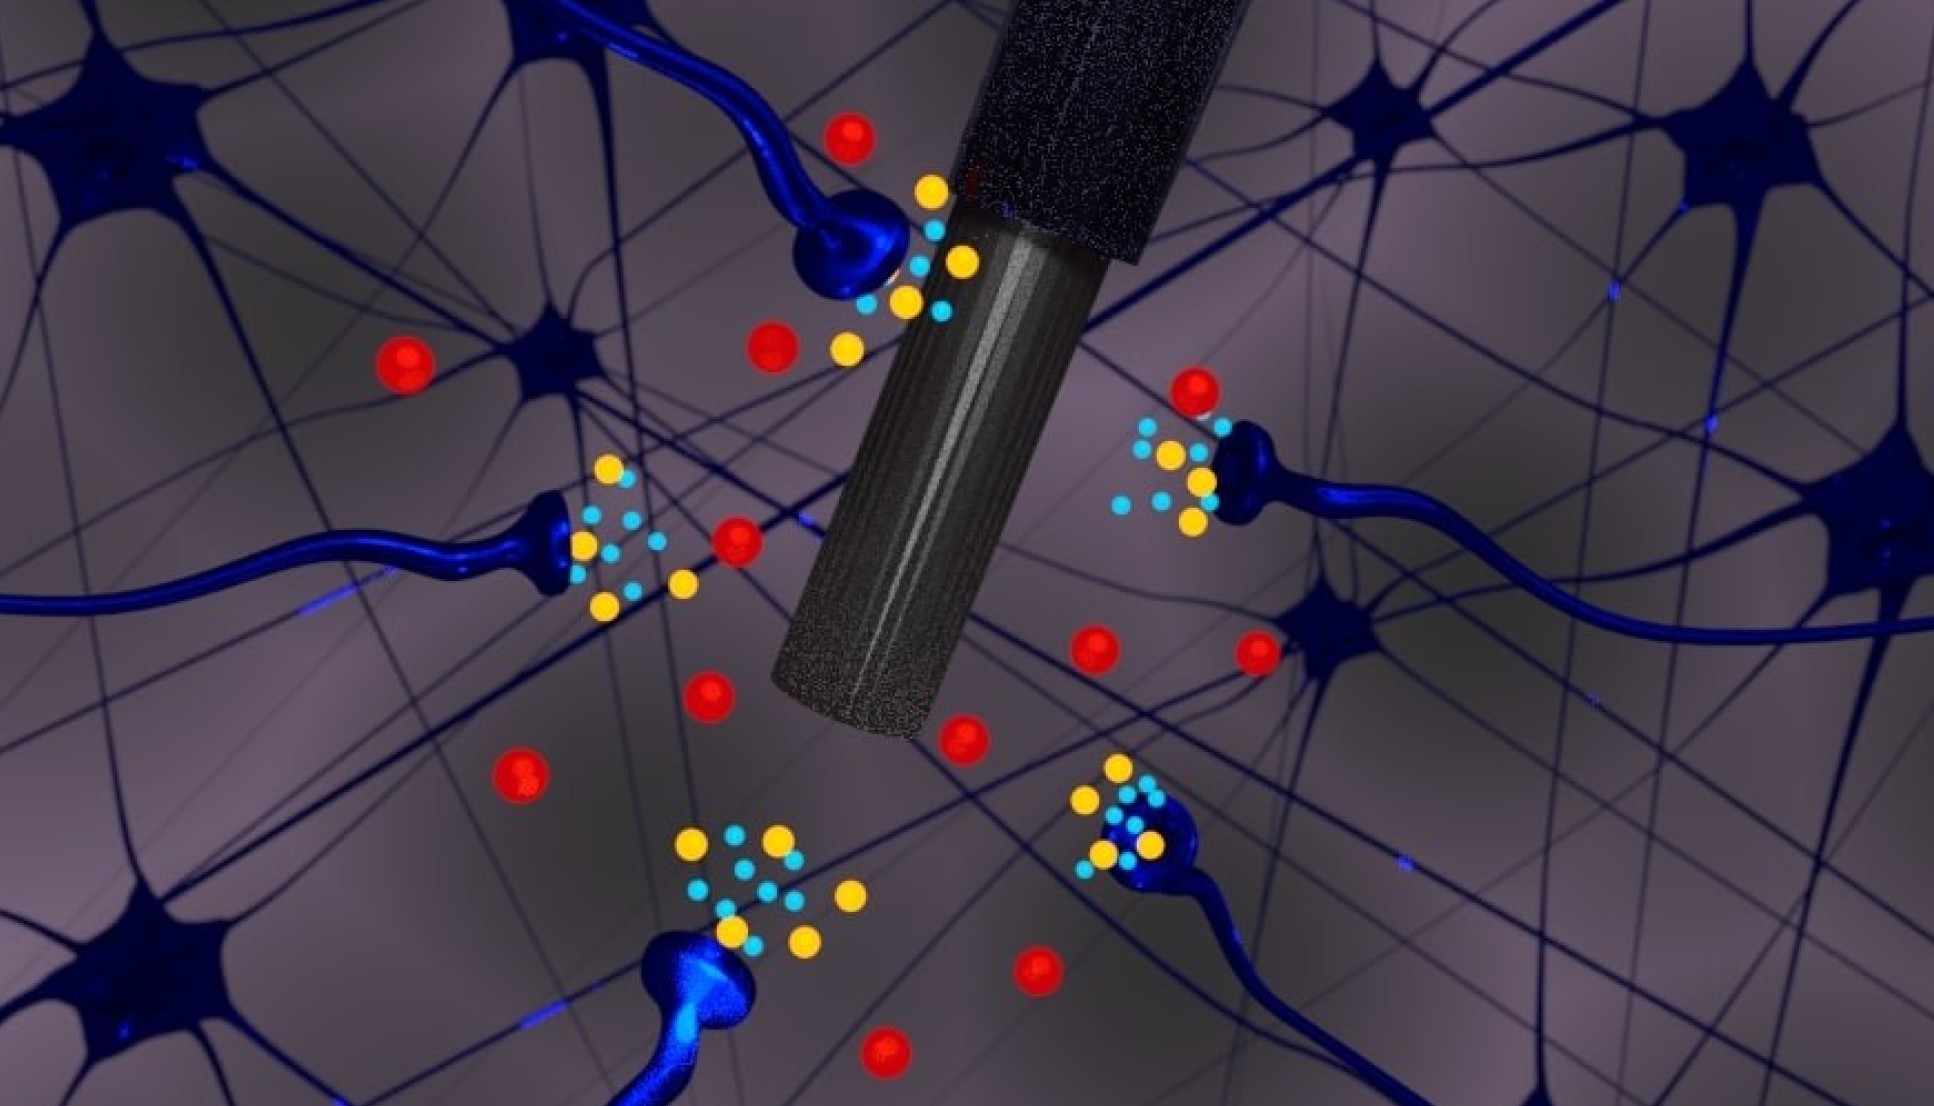 3D rendering showing the microelectrode among different neurons